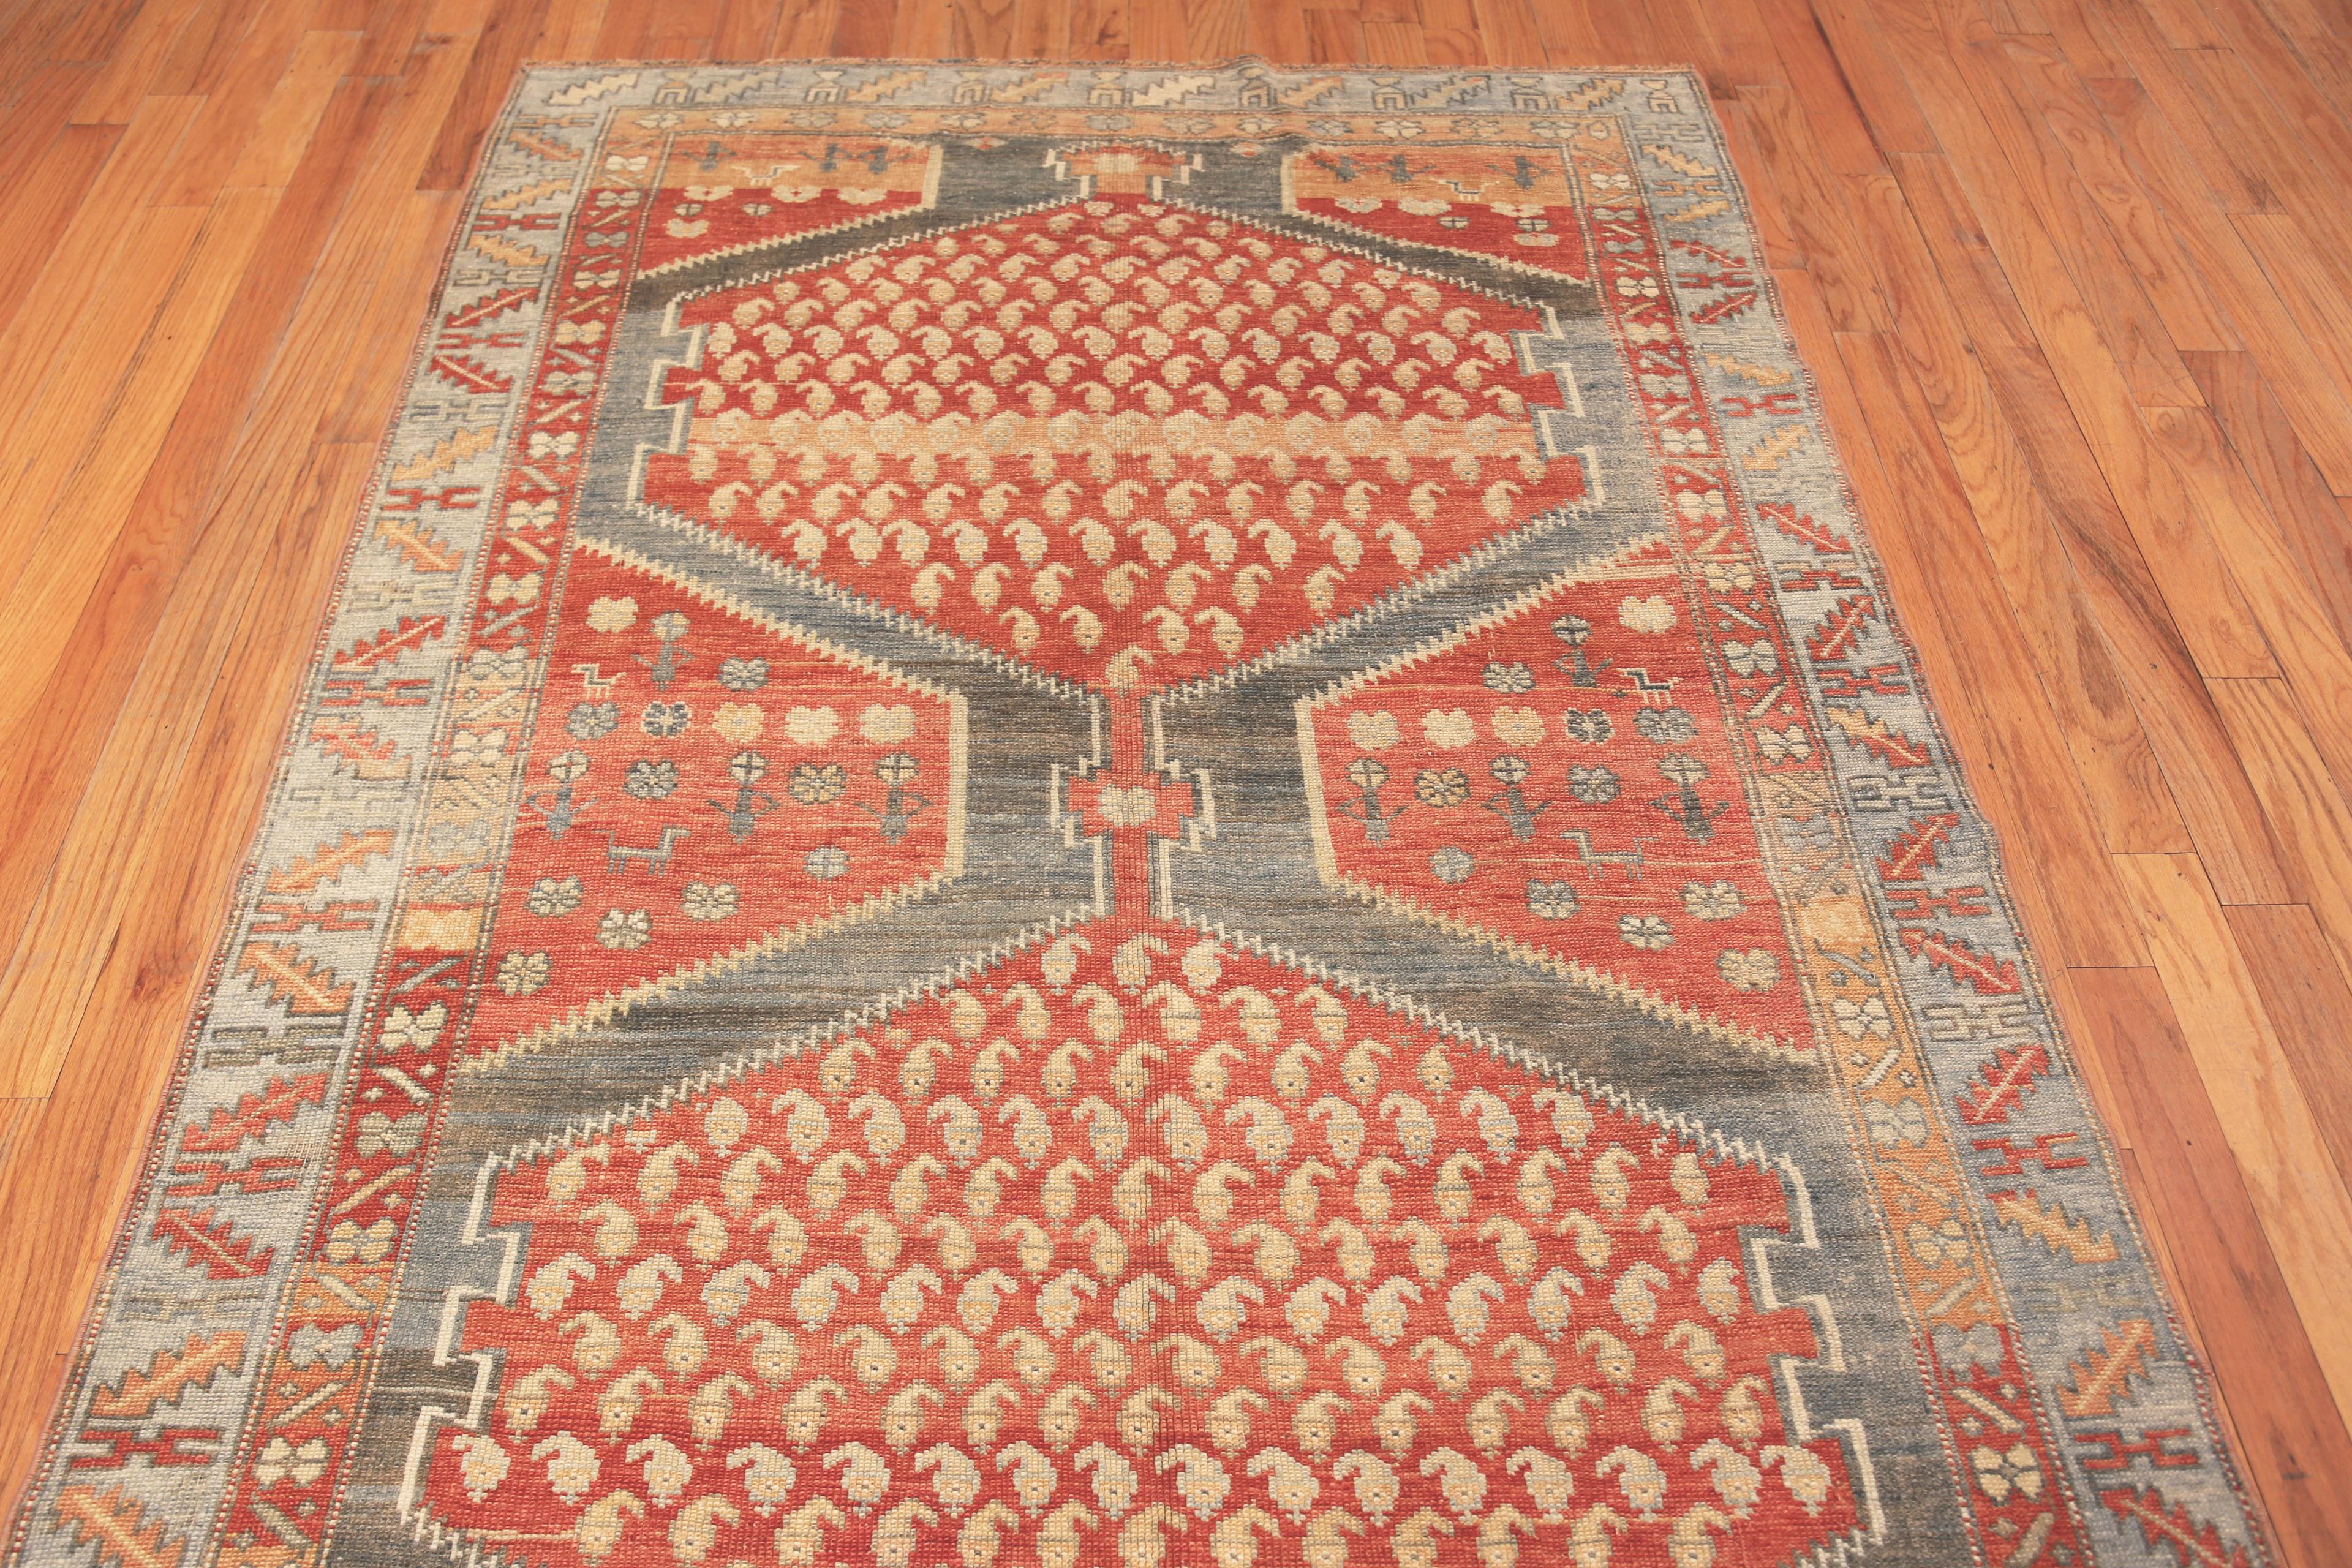 Rustic Antique Tribal Paisley North West Persian Gallery Size Abrash Rug, Country of Origin: Persia, Circa date: 1920. Size: 5 ft 4 in x 17 ft (1.63 m x 5.18 m)

